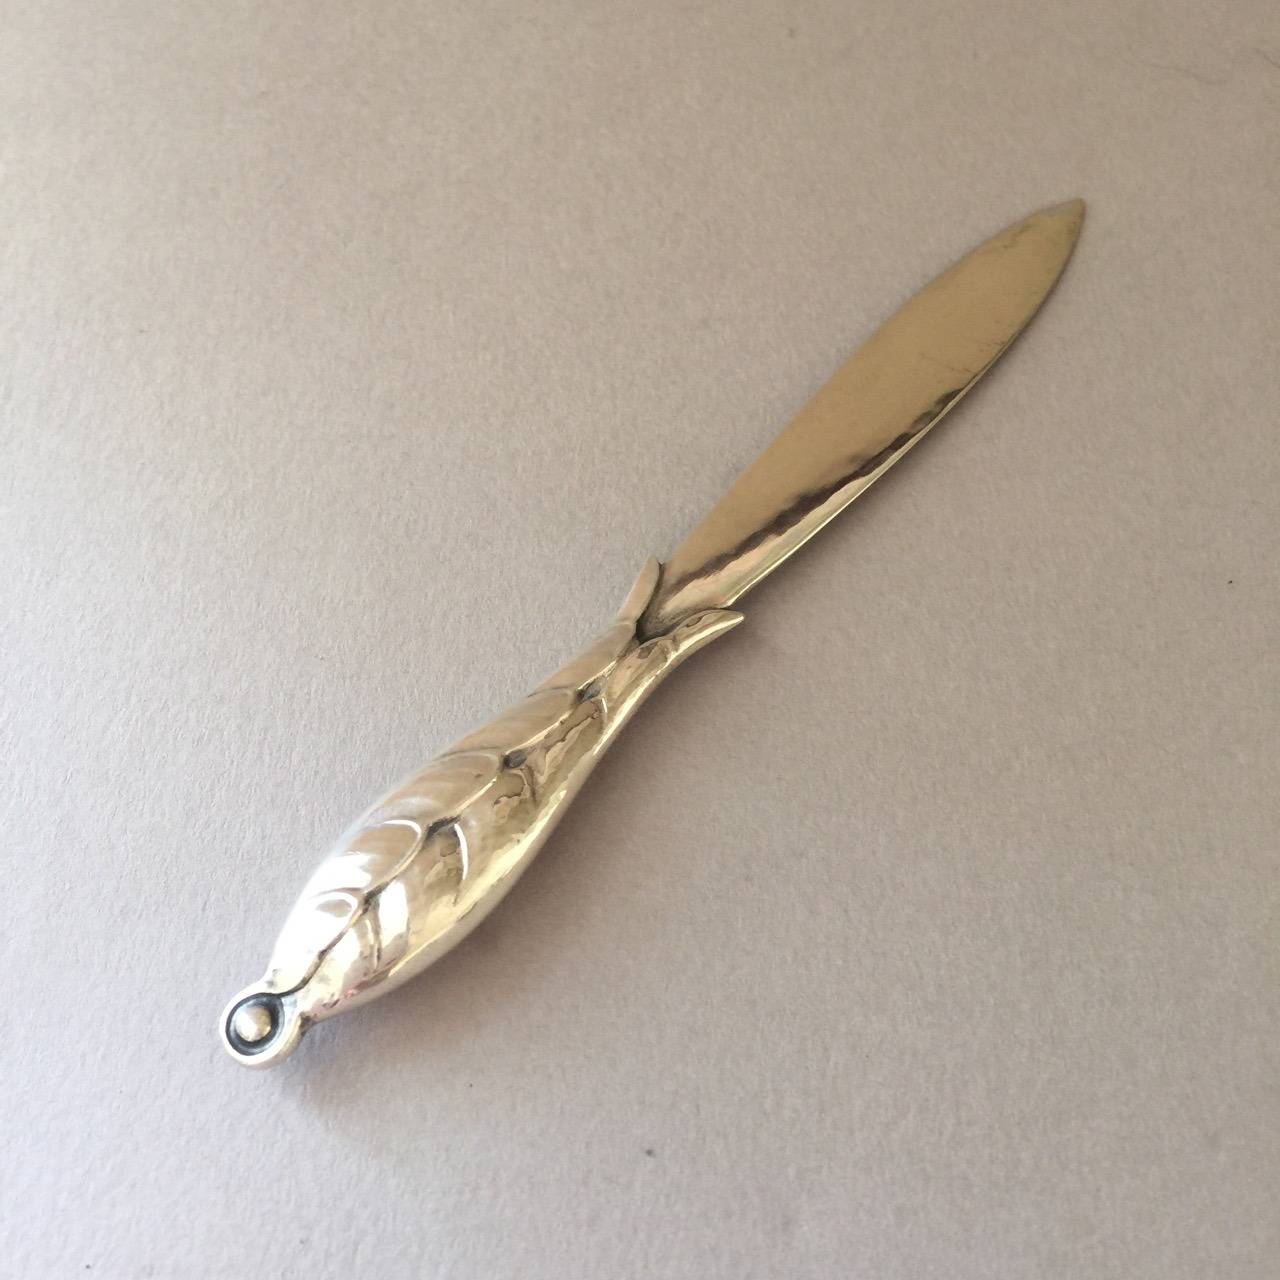 Georg Jensen Paper Knife No. 124 Very Rare.

Exquisitely handmade with a leaf motif hollow handle and all silver blade. Date marks from 1924, 830 silver.

5.5